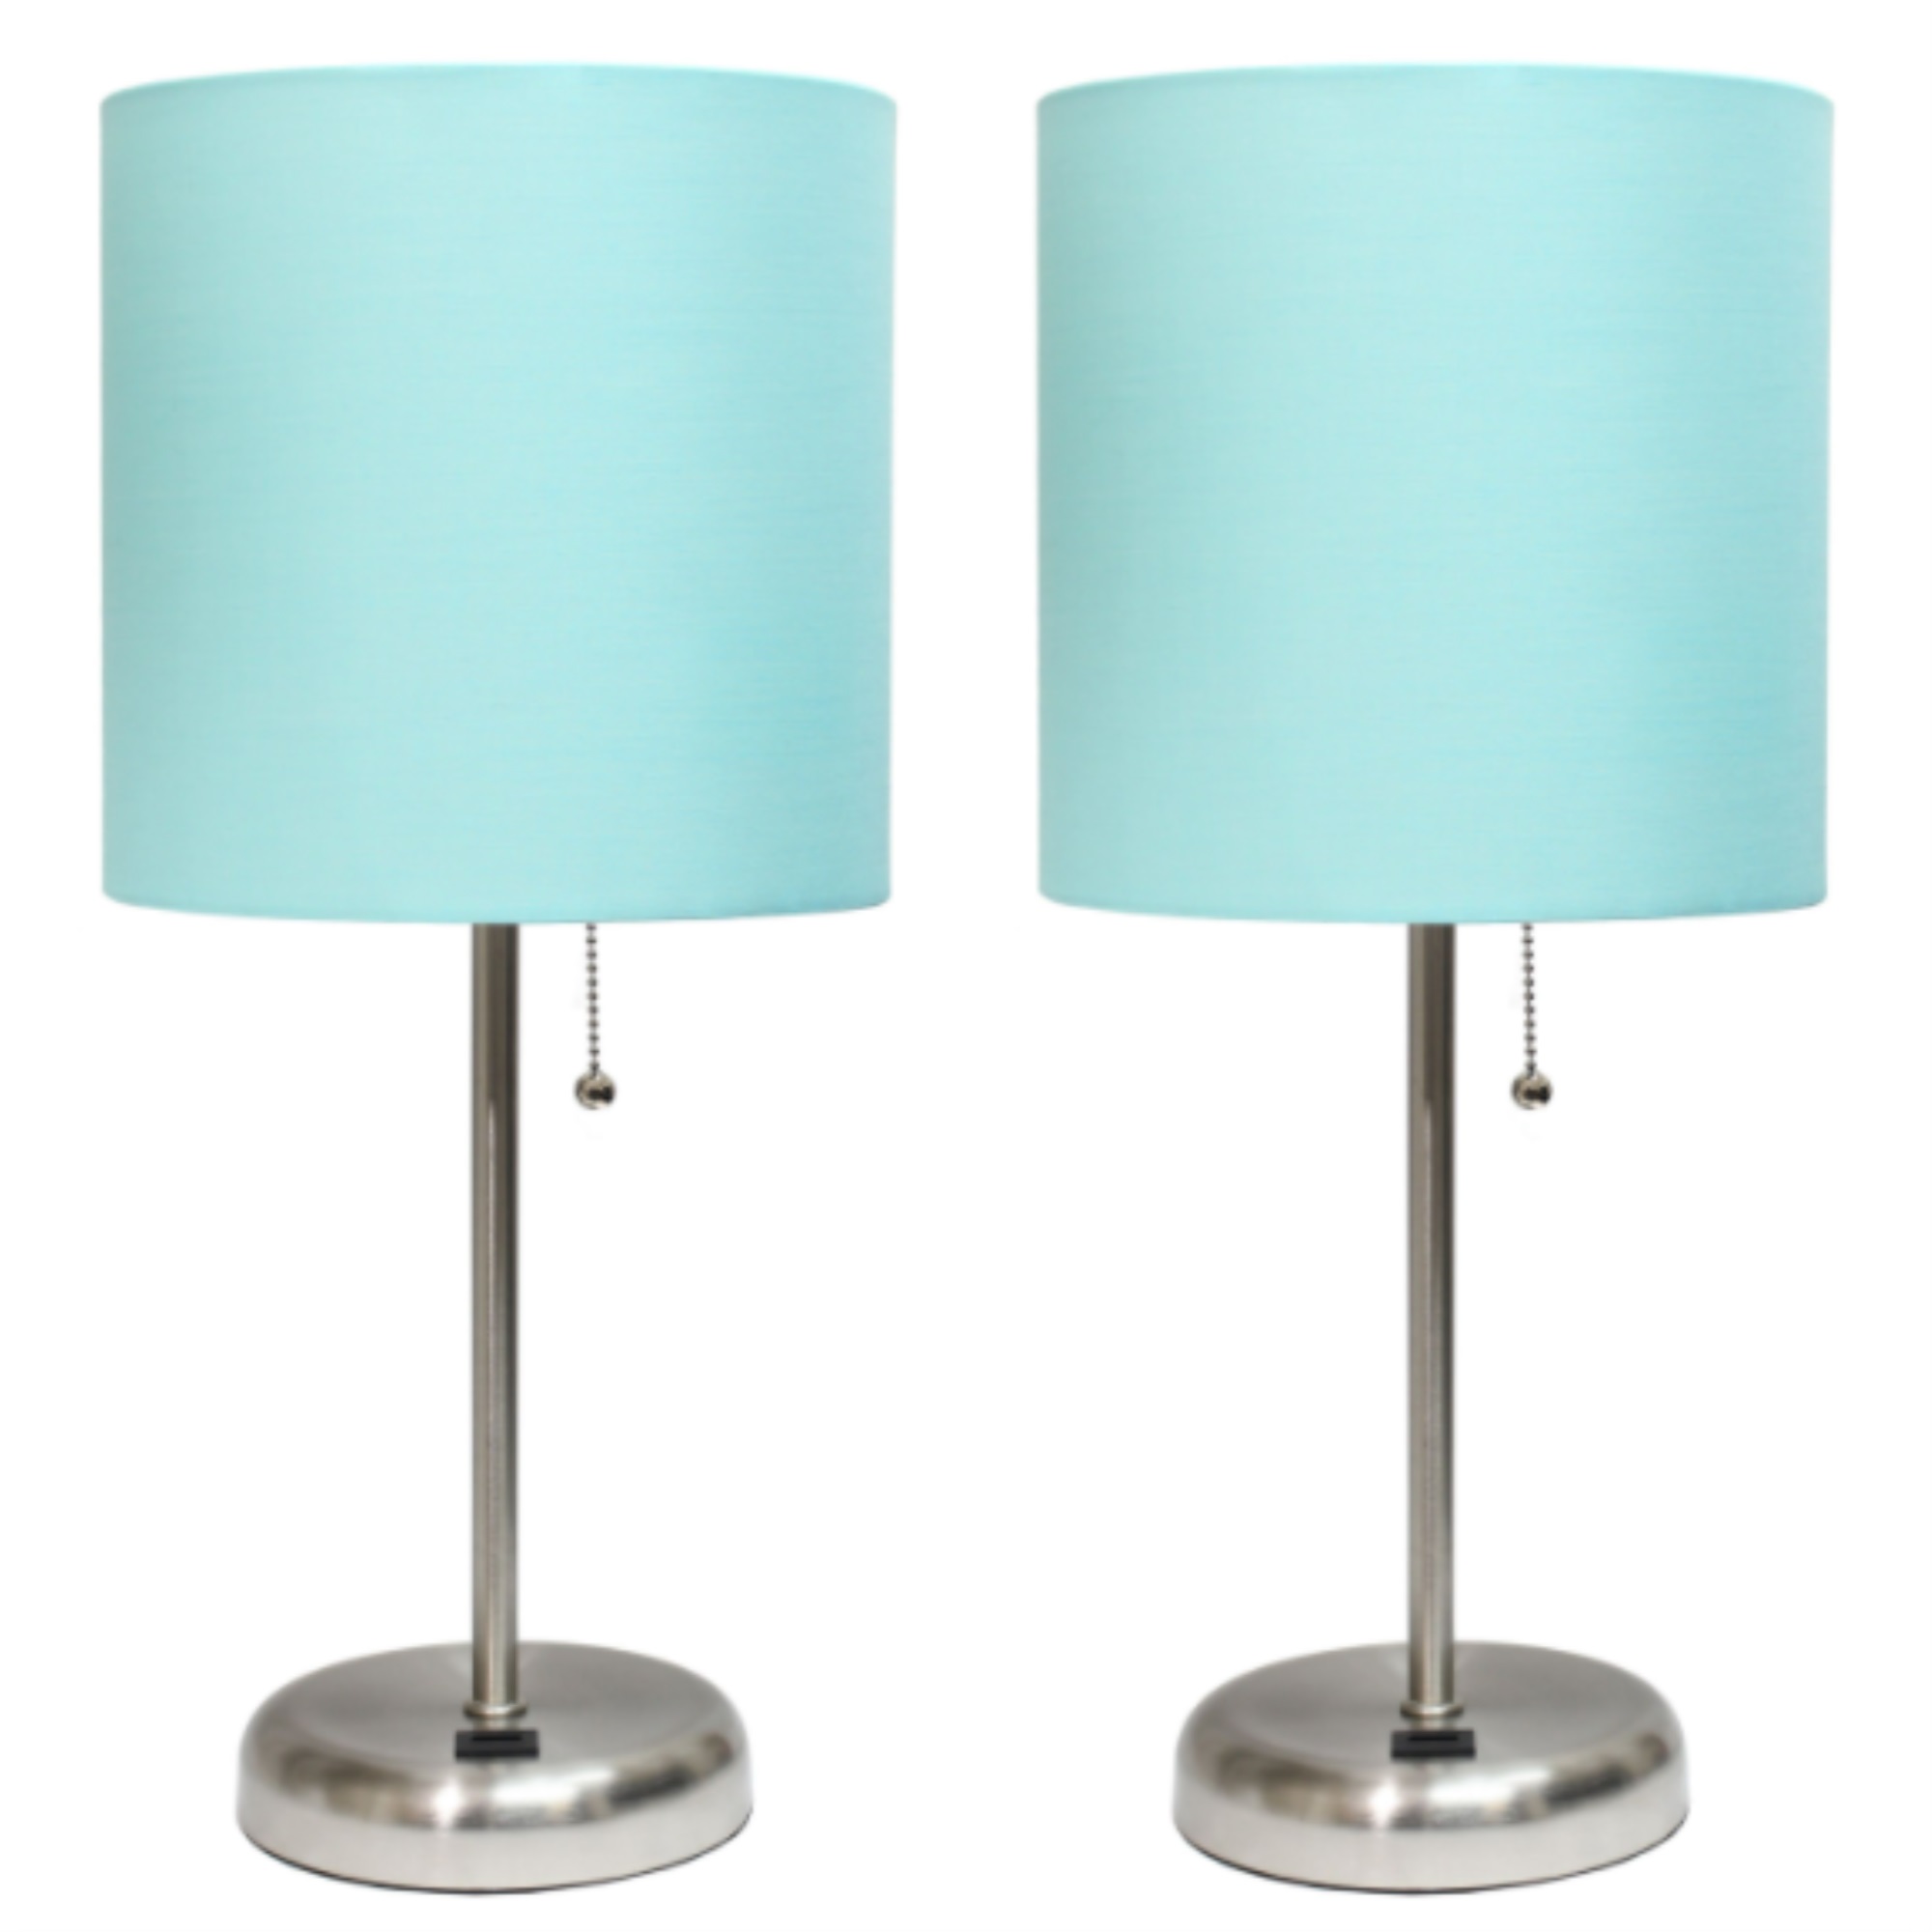 LimeLights Stick Lamp with USB charging port and Fabric Shade 2 Pack Set, Aqua